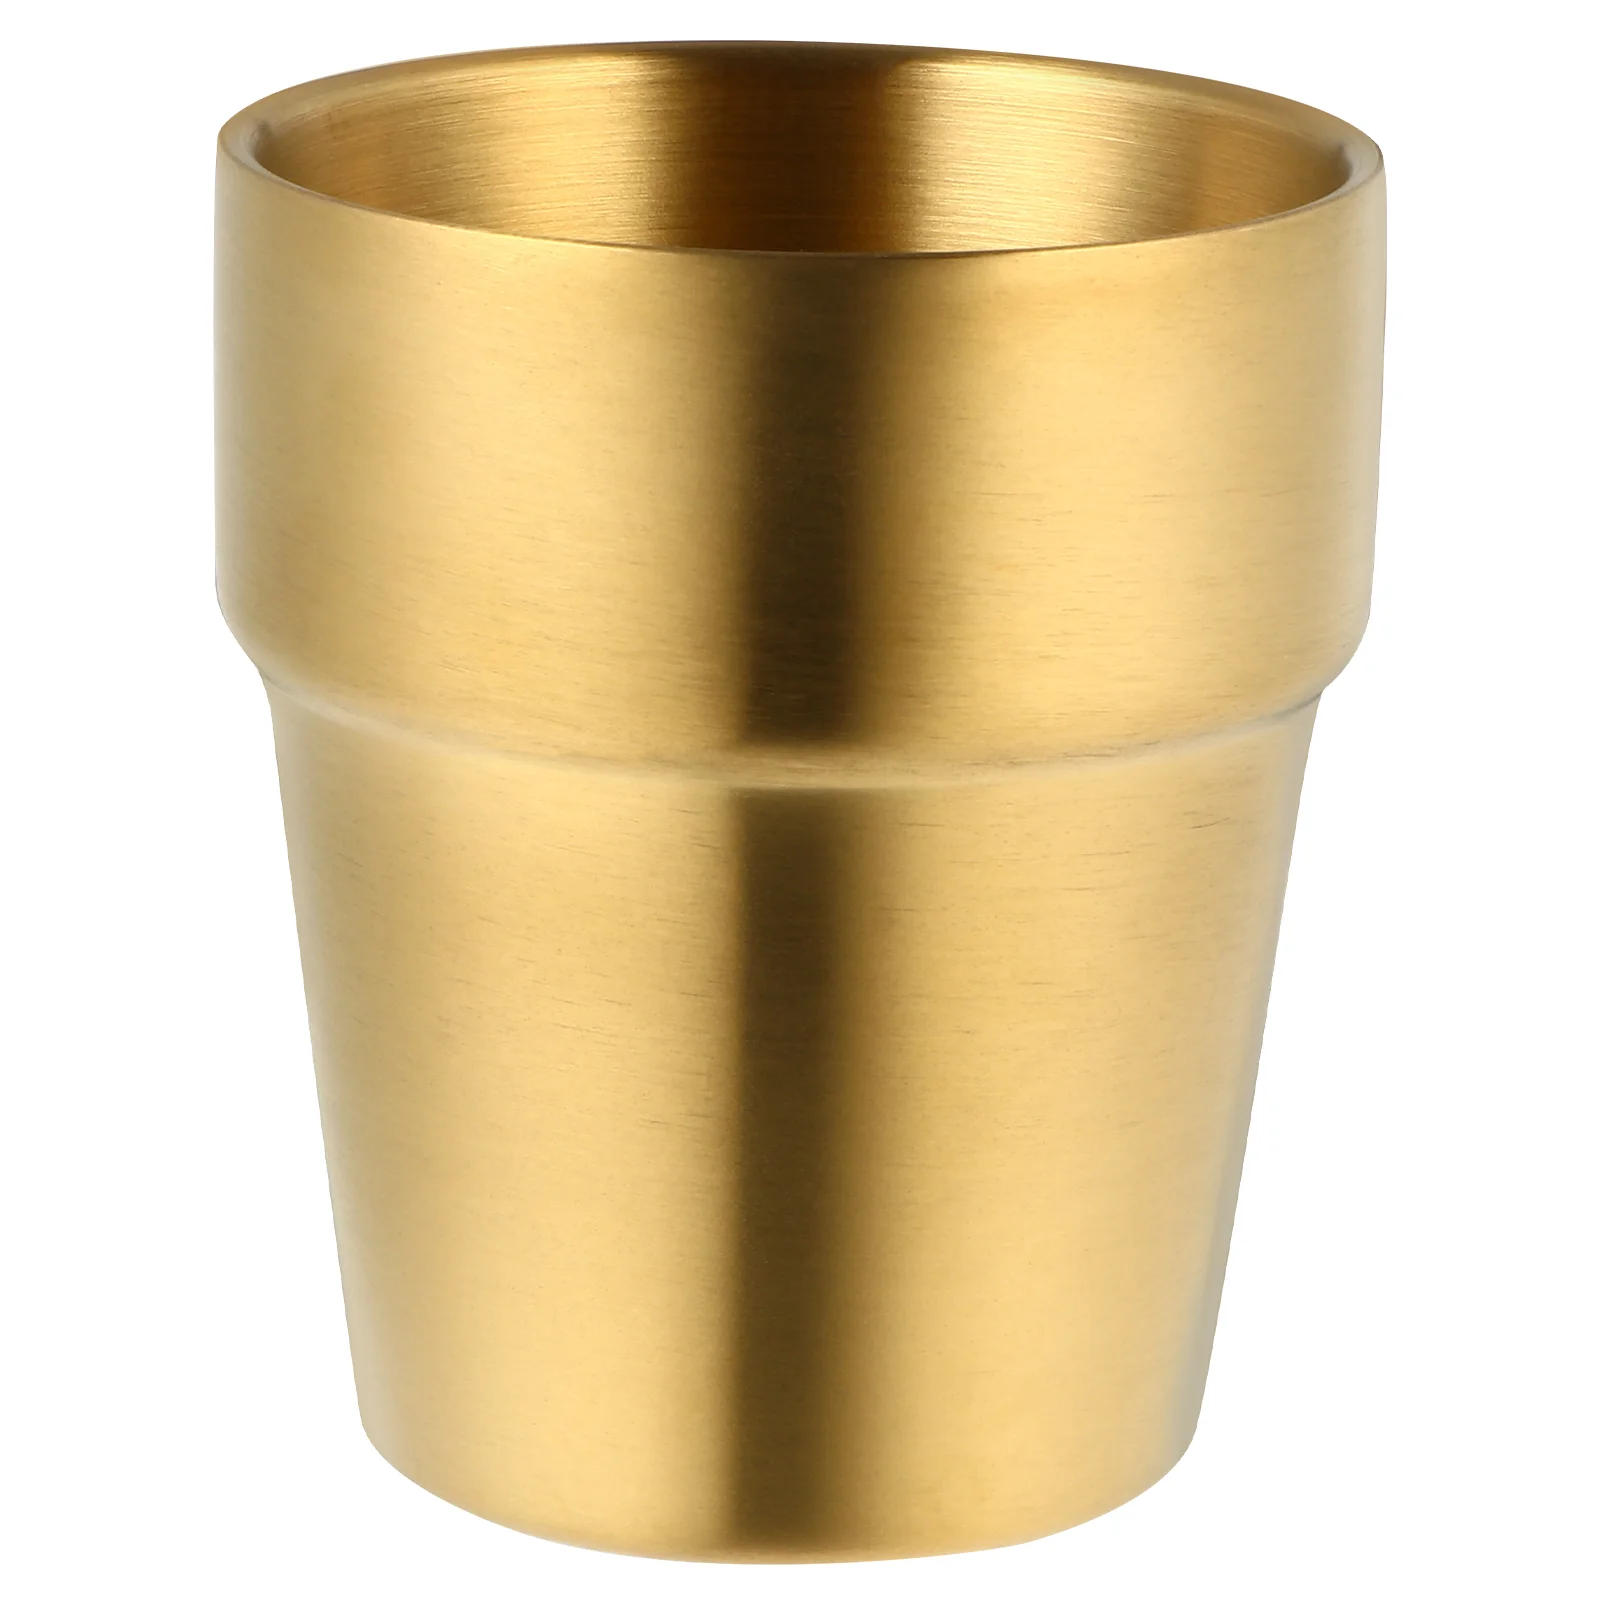 

Cup Mug Metal Steel Stainless Drinking Beer Cups Glasses Tumbler Coffee Whisky Tea Water Whiskey Gold Tumblers Cocktail Double